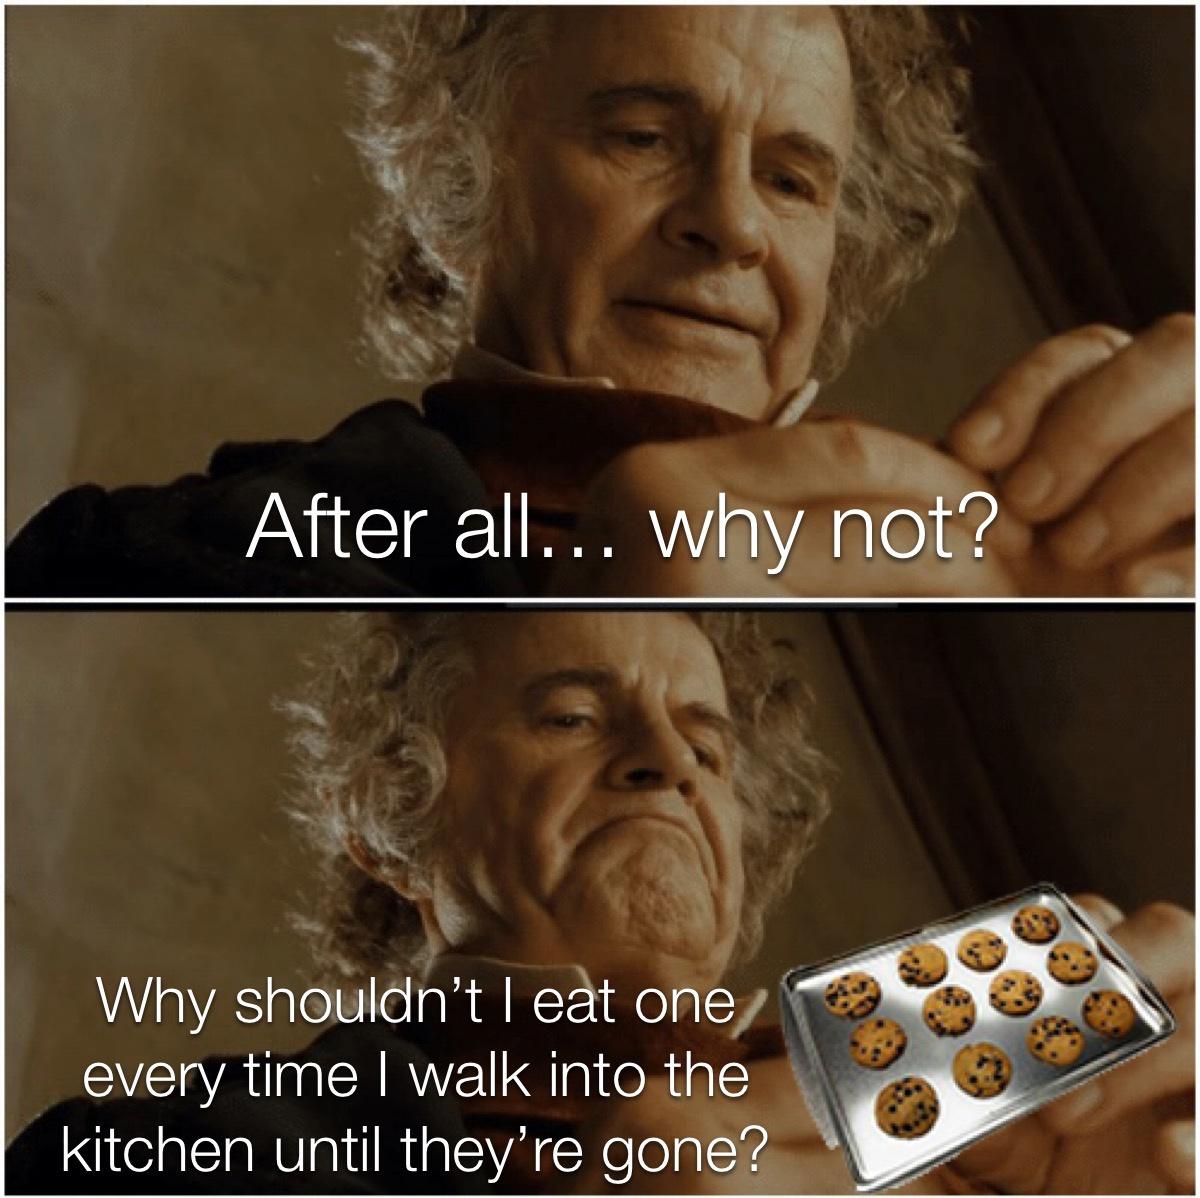 after all why not meme template - After all... why not? Why shouldn't I eat one every time I walk into the kitchen until they're gone?